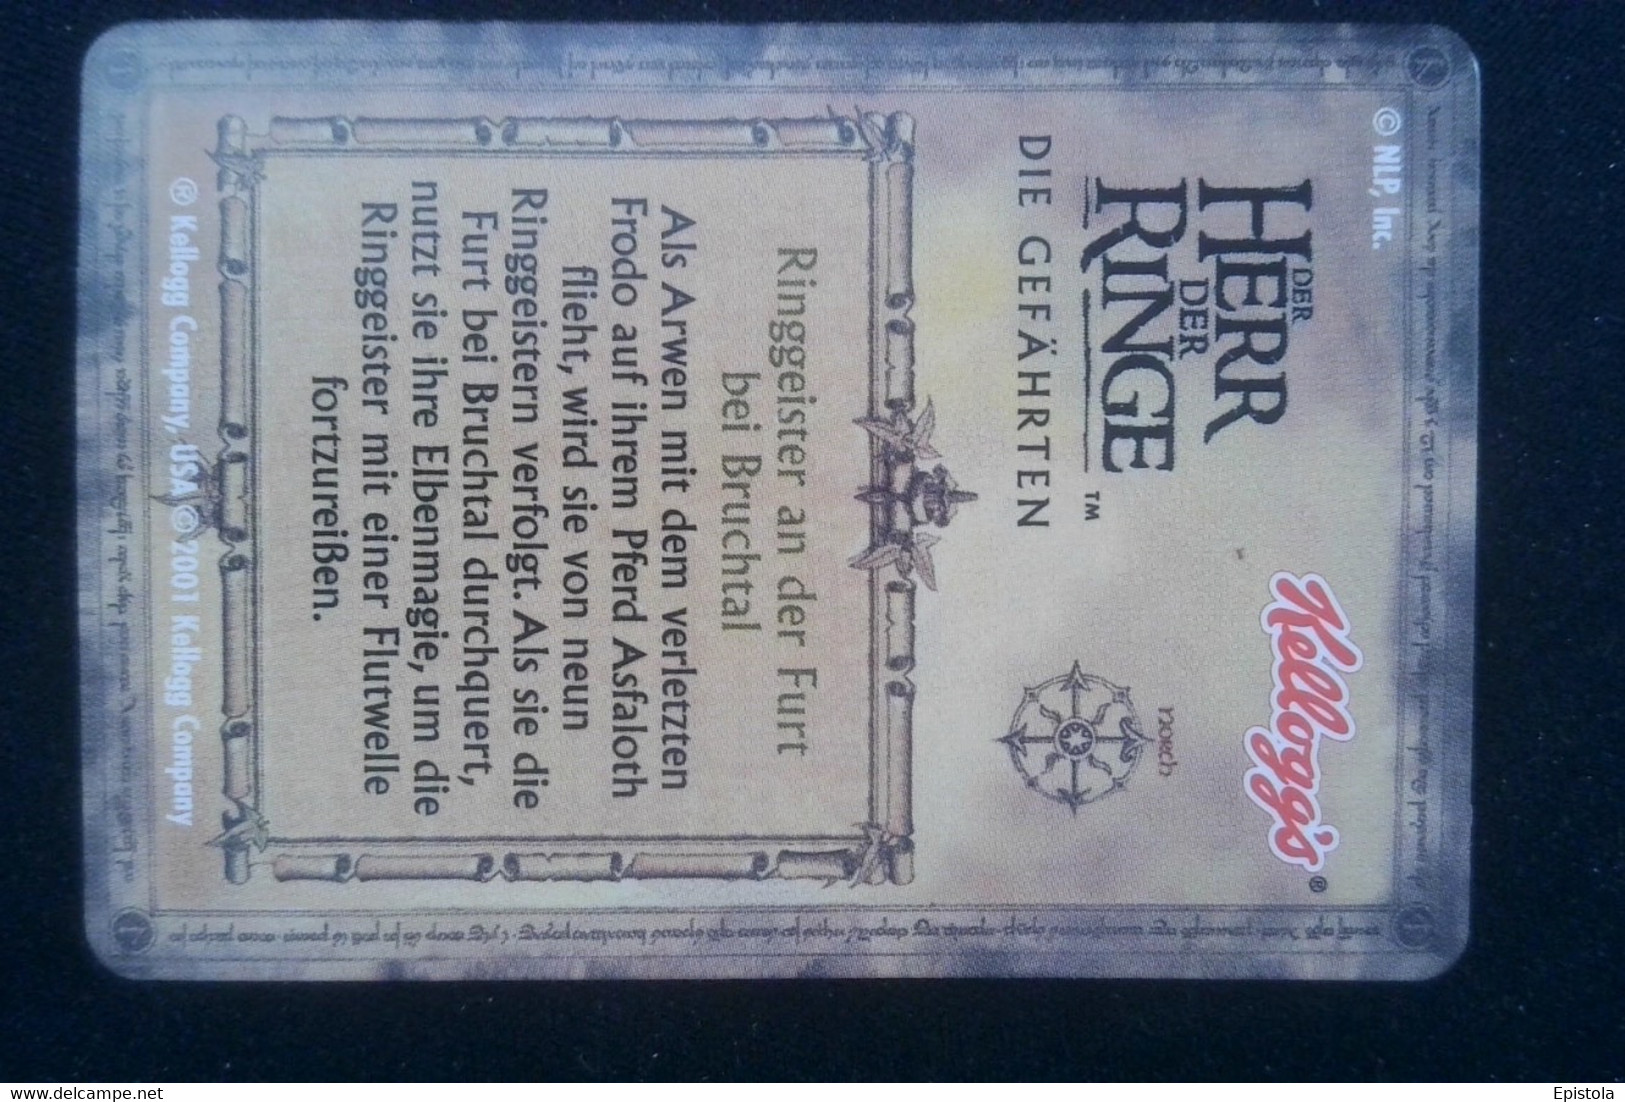 ► RINGGEISTER Lord Of The Rings (3D German Trading Card) Le Seigneur Des Anneaux Version Allemagne En Relief  Kellog's - Il Signore Degli Anelli